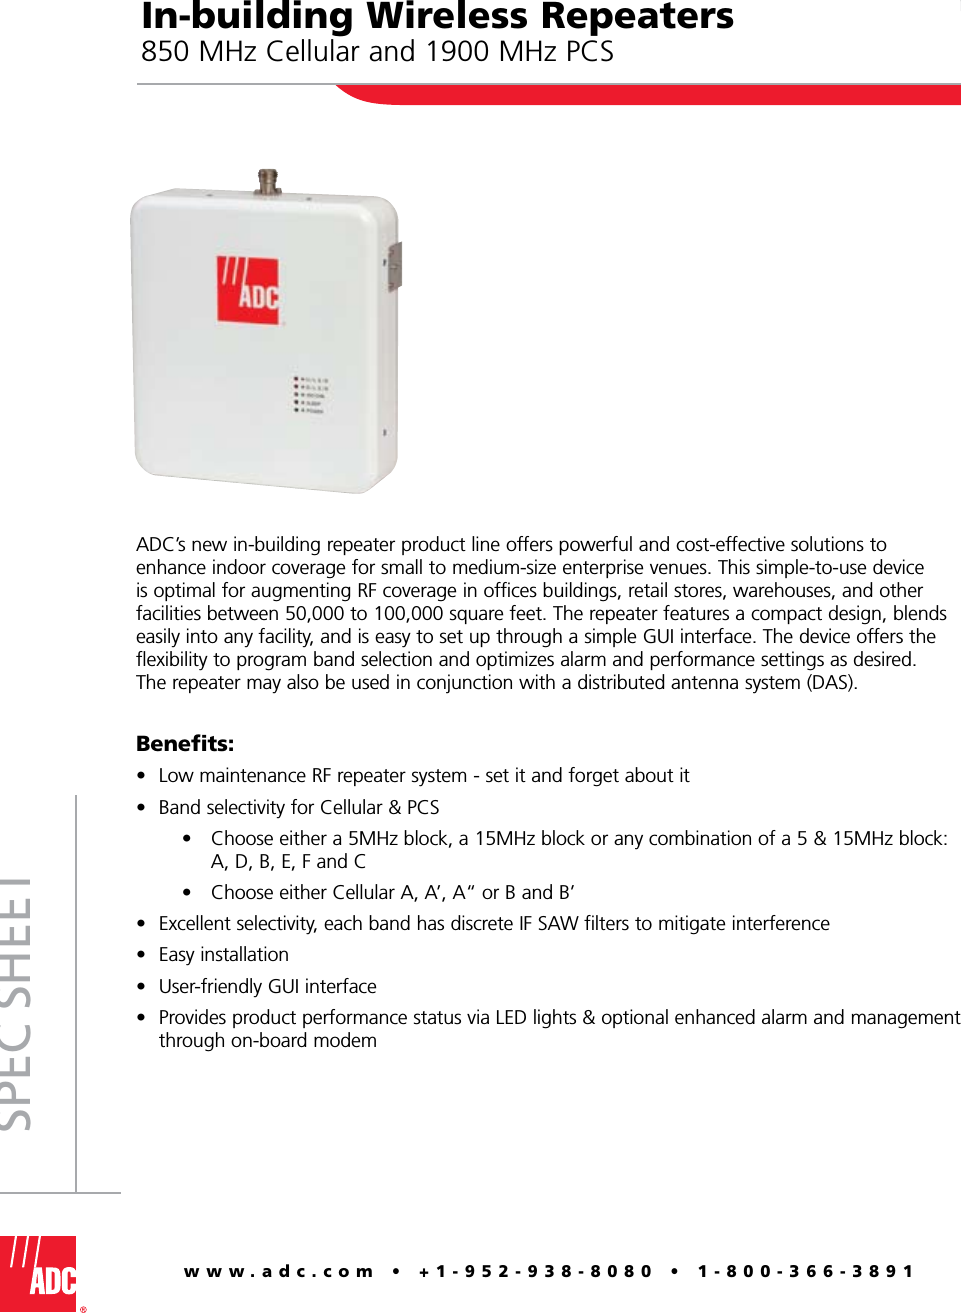 www.adc.com • +1-952-938-8080 • 1-800-366-3891Spec SheetIn-building Wireless Repeaters850 MHz Cellular and 1900 MHz PCSADC’s new in-building repeater product line offers powerful and cost-effective solutions to enhance indoor coverage for small to medium-size enterprise venues. This simple-to-use device is optimal for augmenting RF coverage in offices buildings, retail stores, warehouses, and other facilities between 50,000 to 100,000 square feet. The repeater features a compact design, blends easily into any facility, and is easy to set up through a simple GUI interface. The device offers the flexibility to program band selection and optimizes alarm and performance settings as desired.  The repeater may also be used in conjunction with a distributed antenna system (DAS).Benefits:Low maintenance RF repeater system - set it and forget about it Band selectivity for Cellular &amp; PCS     •  Choose either a 5MHz block, a 15MHz block or any combination of a 5 &amp; 15MHz block:      A, D, B, E, F and C     •  Choose either Cellular A, A’, A“ or B and B’Excellent selectivity, each band has discrete IF SAW filters to mitigate interferenceEasy installationUser-friendly GUI interfaceProvides product performance status via LED lights &amp; optional enhanced alarm and management through on-board modem••••••